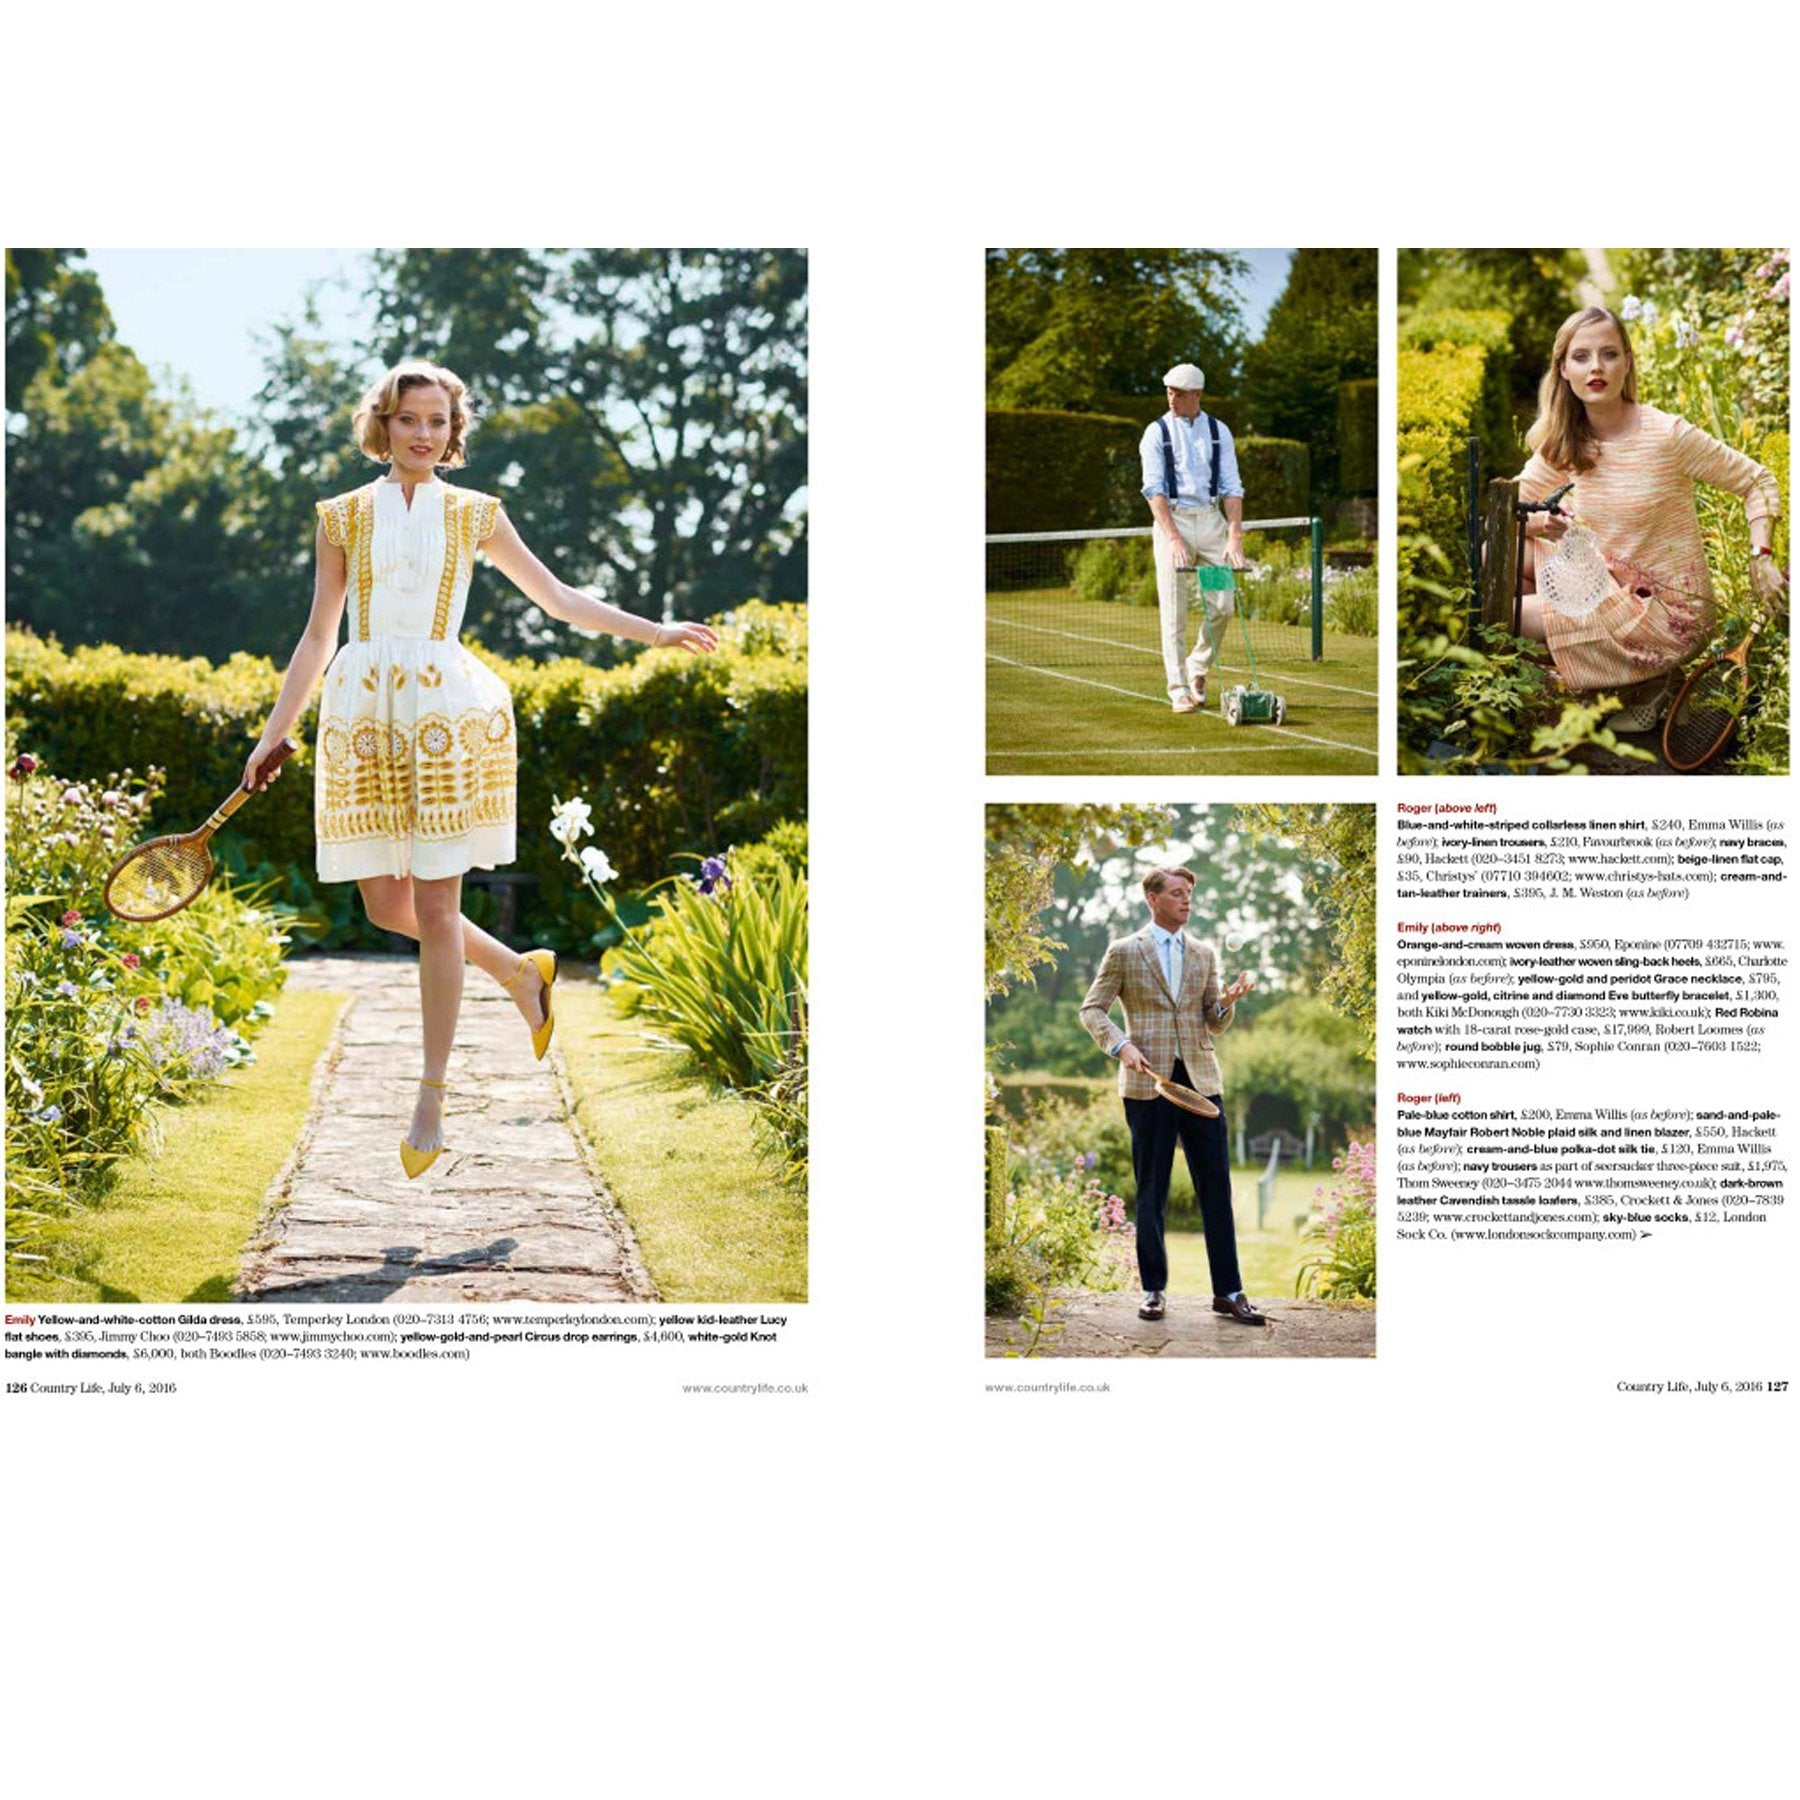 Emma Willis shirts featured in this month’s issue of Country Life’s The Best of Britain - Emma Willis